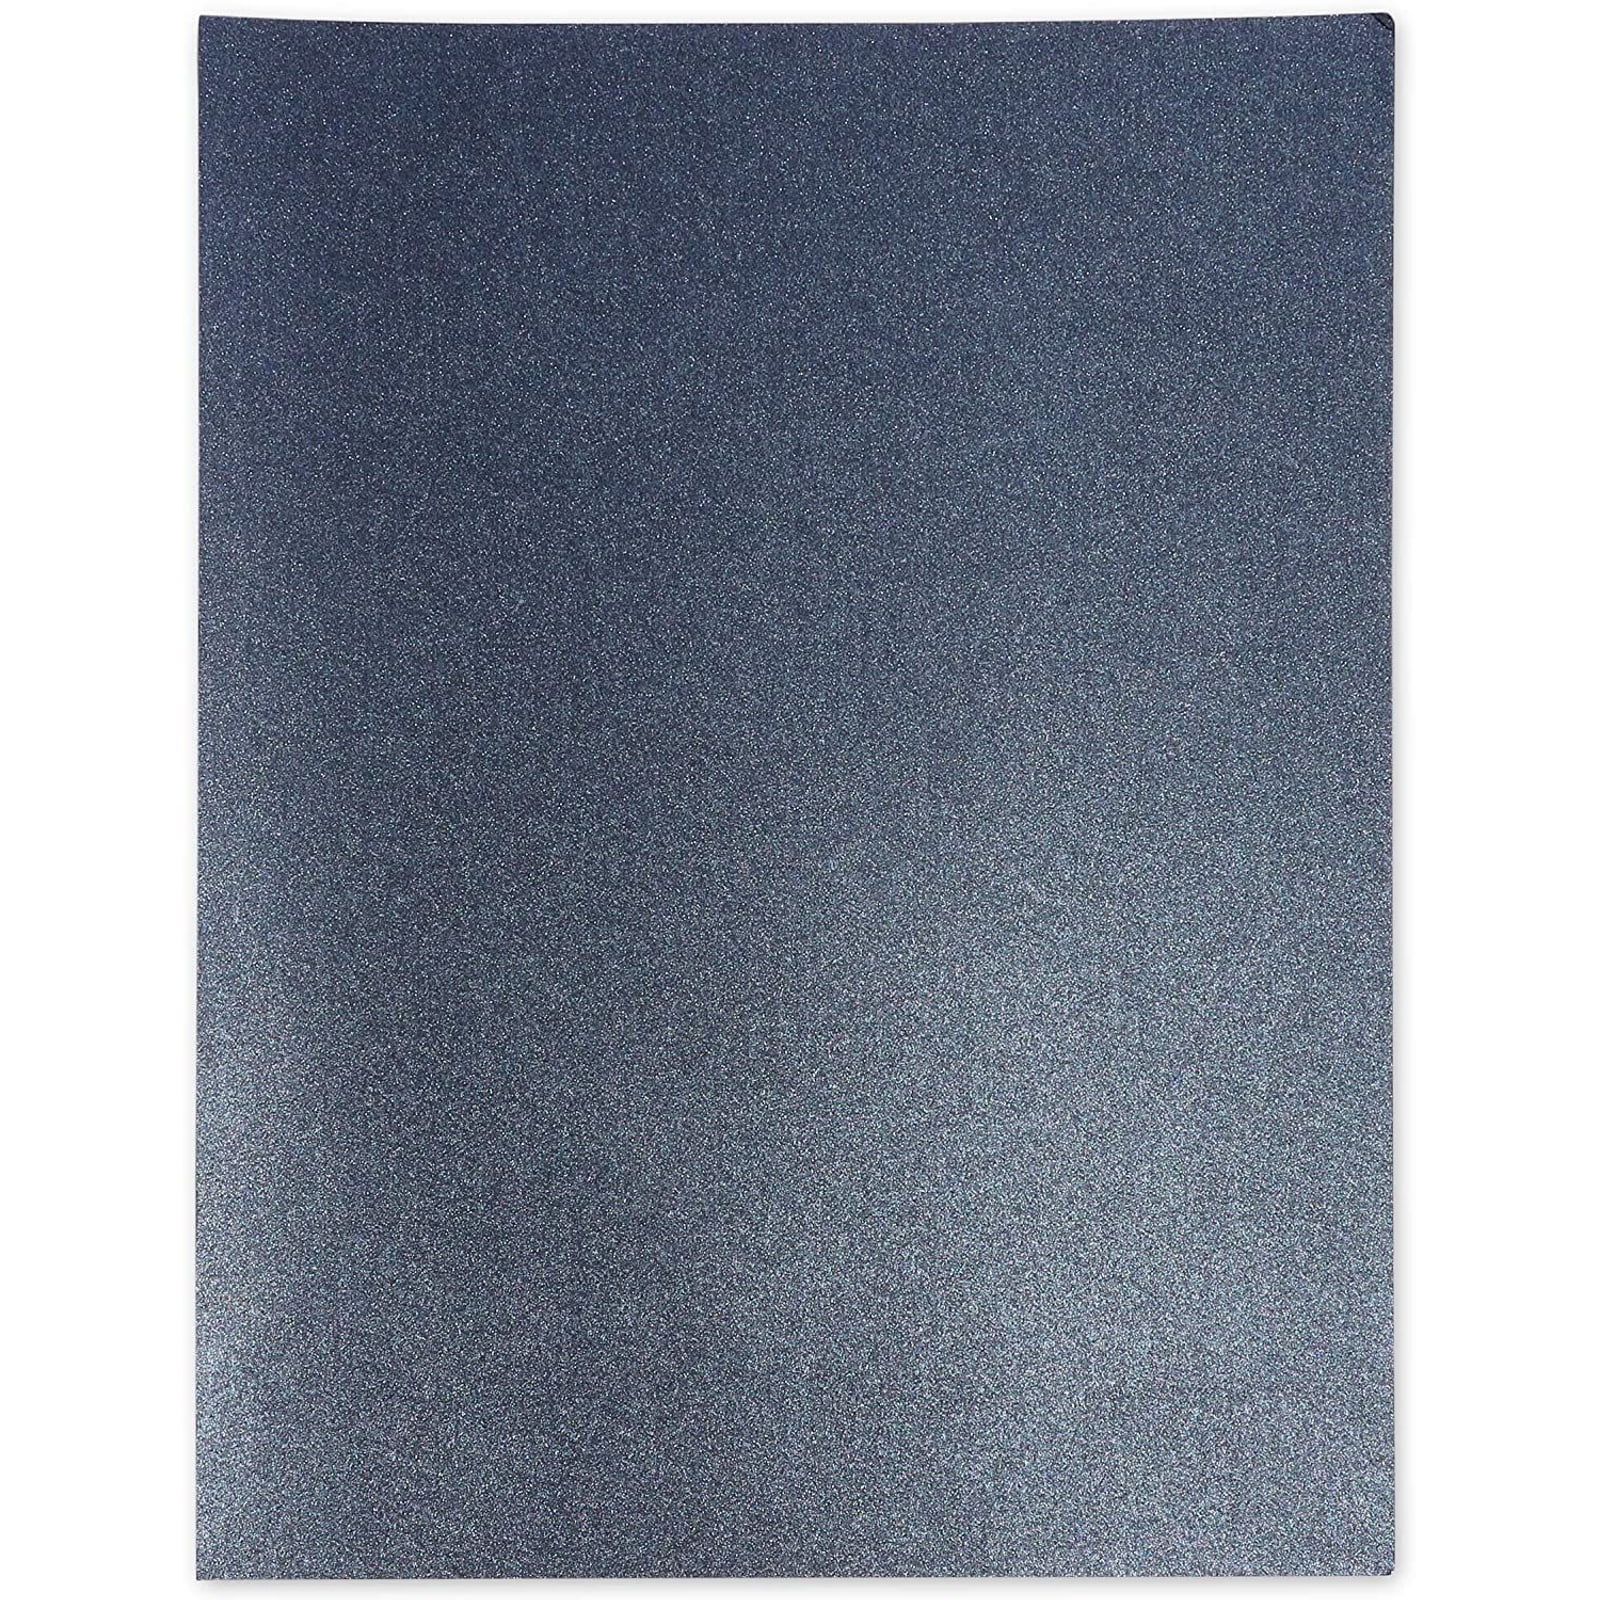 Navy Blue Shimmer Paper - 100-Pack Metallic Cardstock Paper, 92 lb Cover, Double Sided, Printer Friendly - Perfect for Weddings, Birthdays, Craft